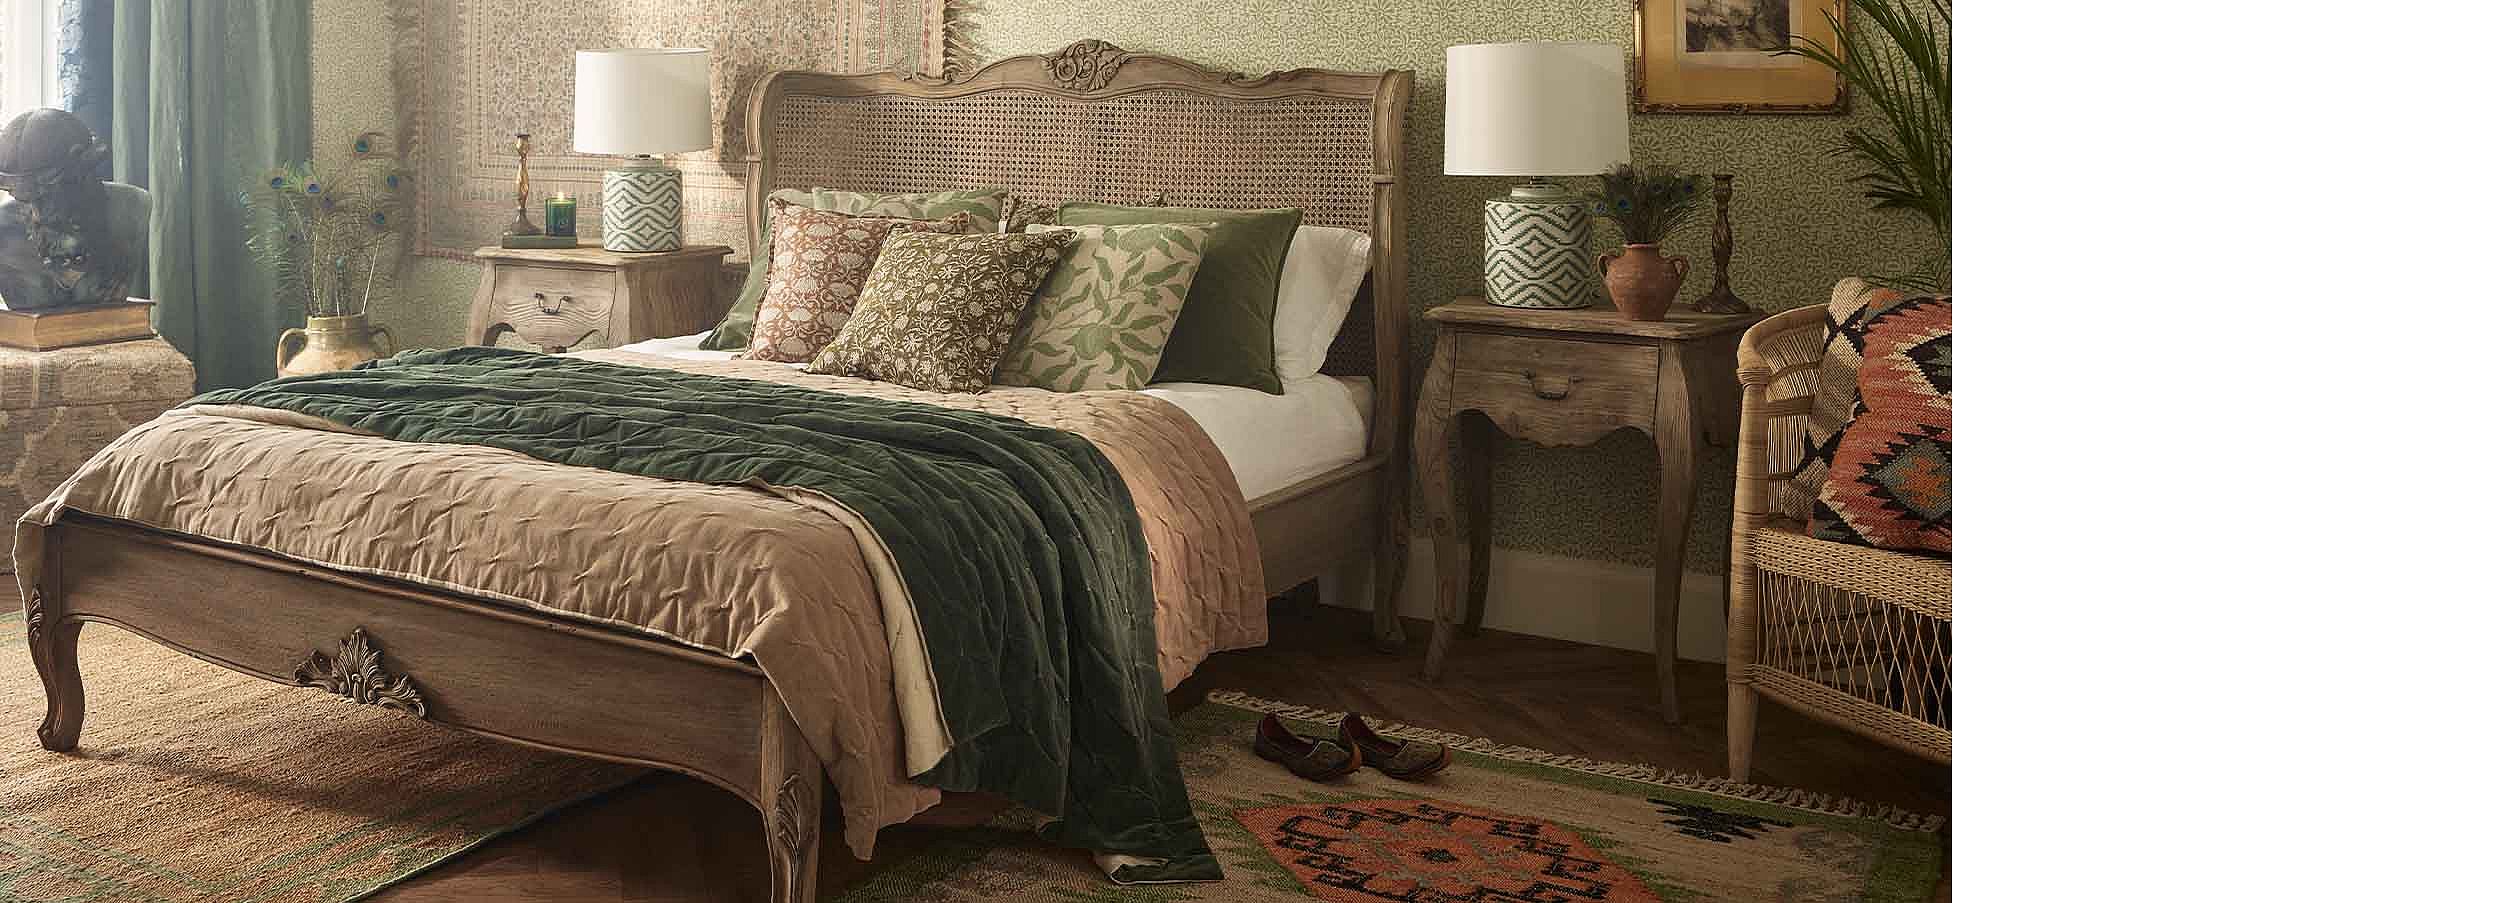 SHOP French Beds